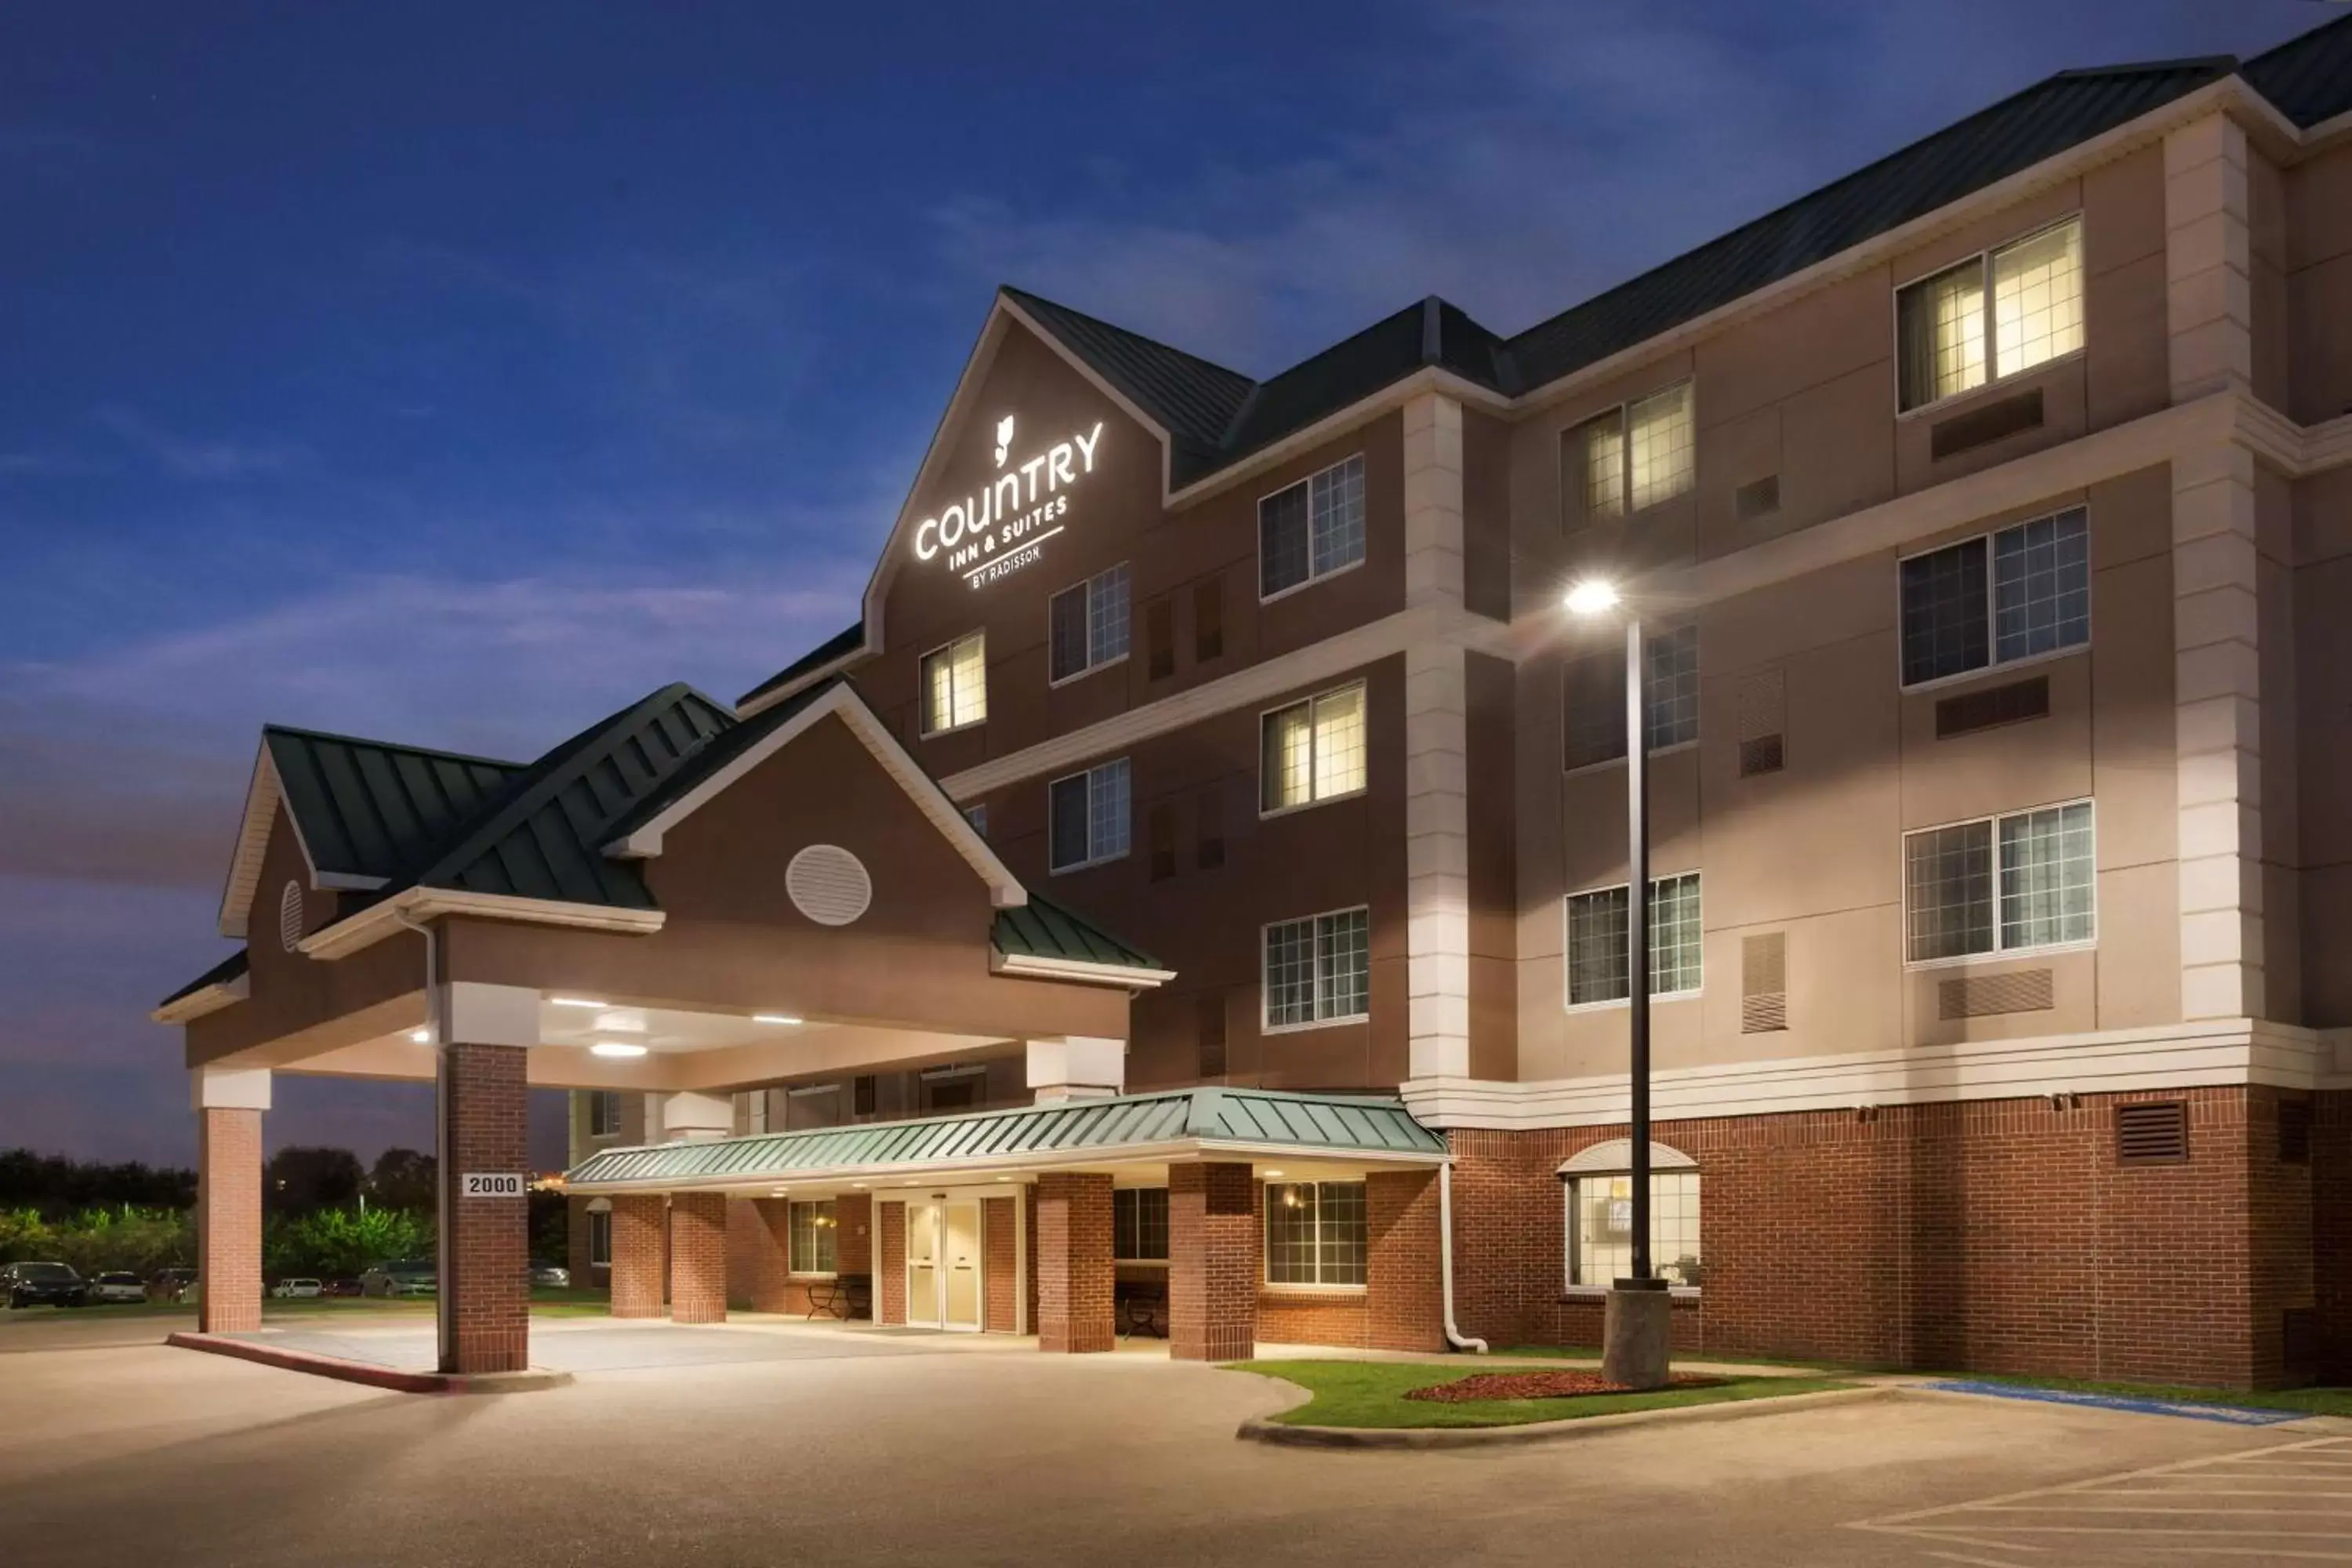 Property building in Country Inn & Suites by Radisson, DFW Airport South, TX